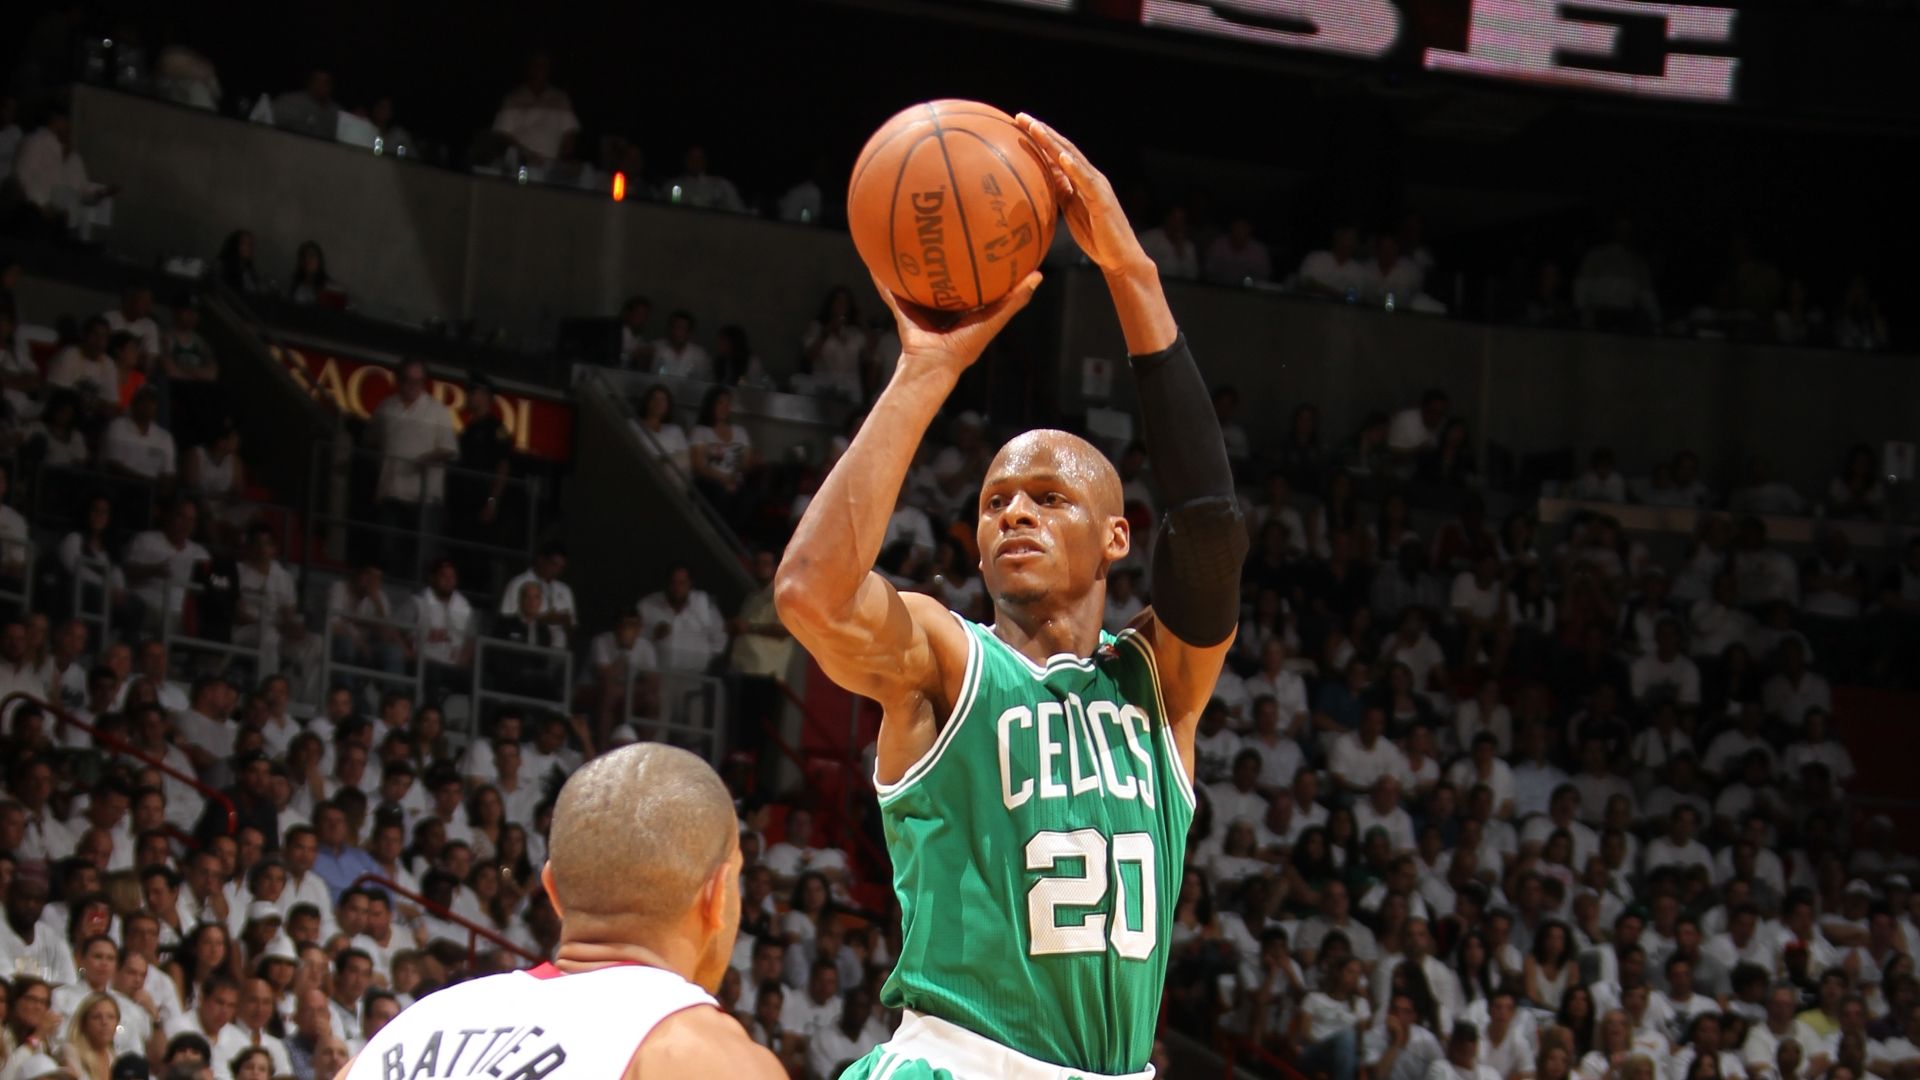 Ray Allen's clutch shooting lands him in Basketball Hall of Fame - ESPN